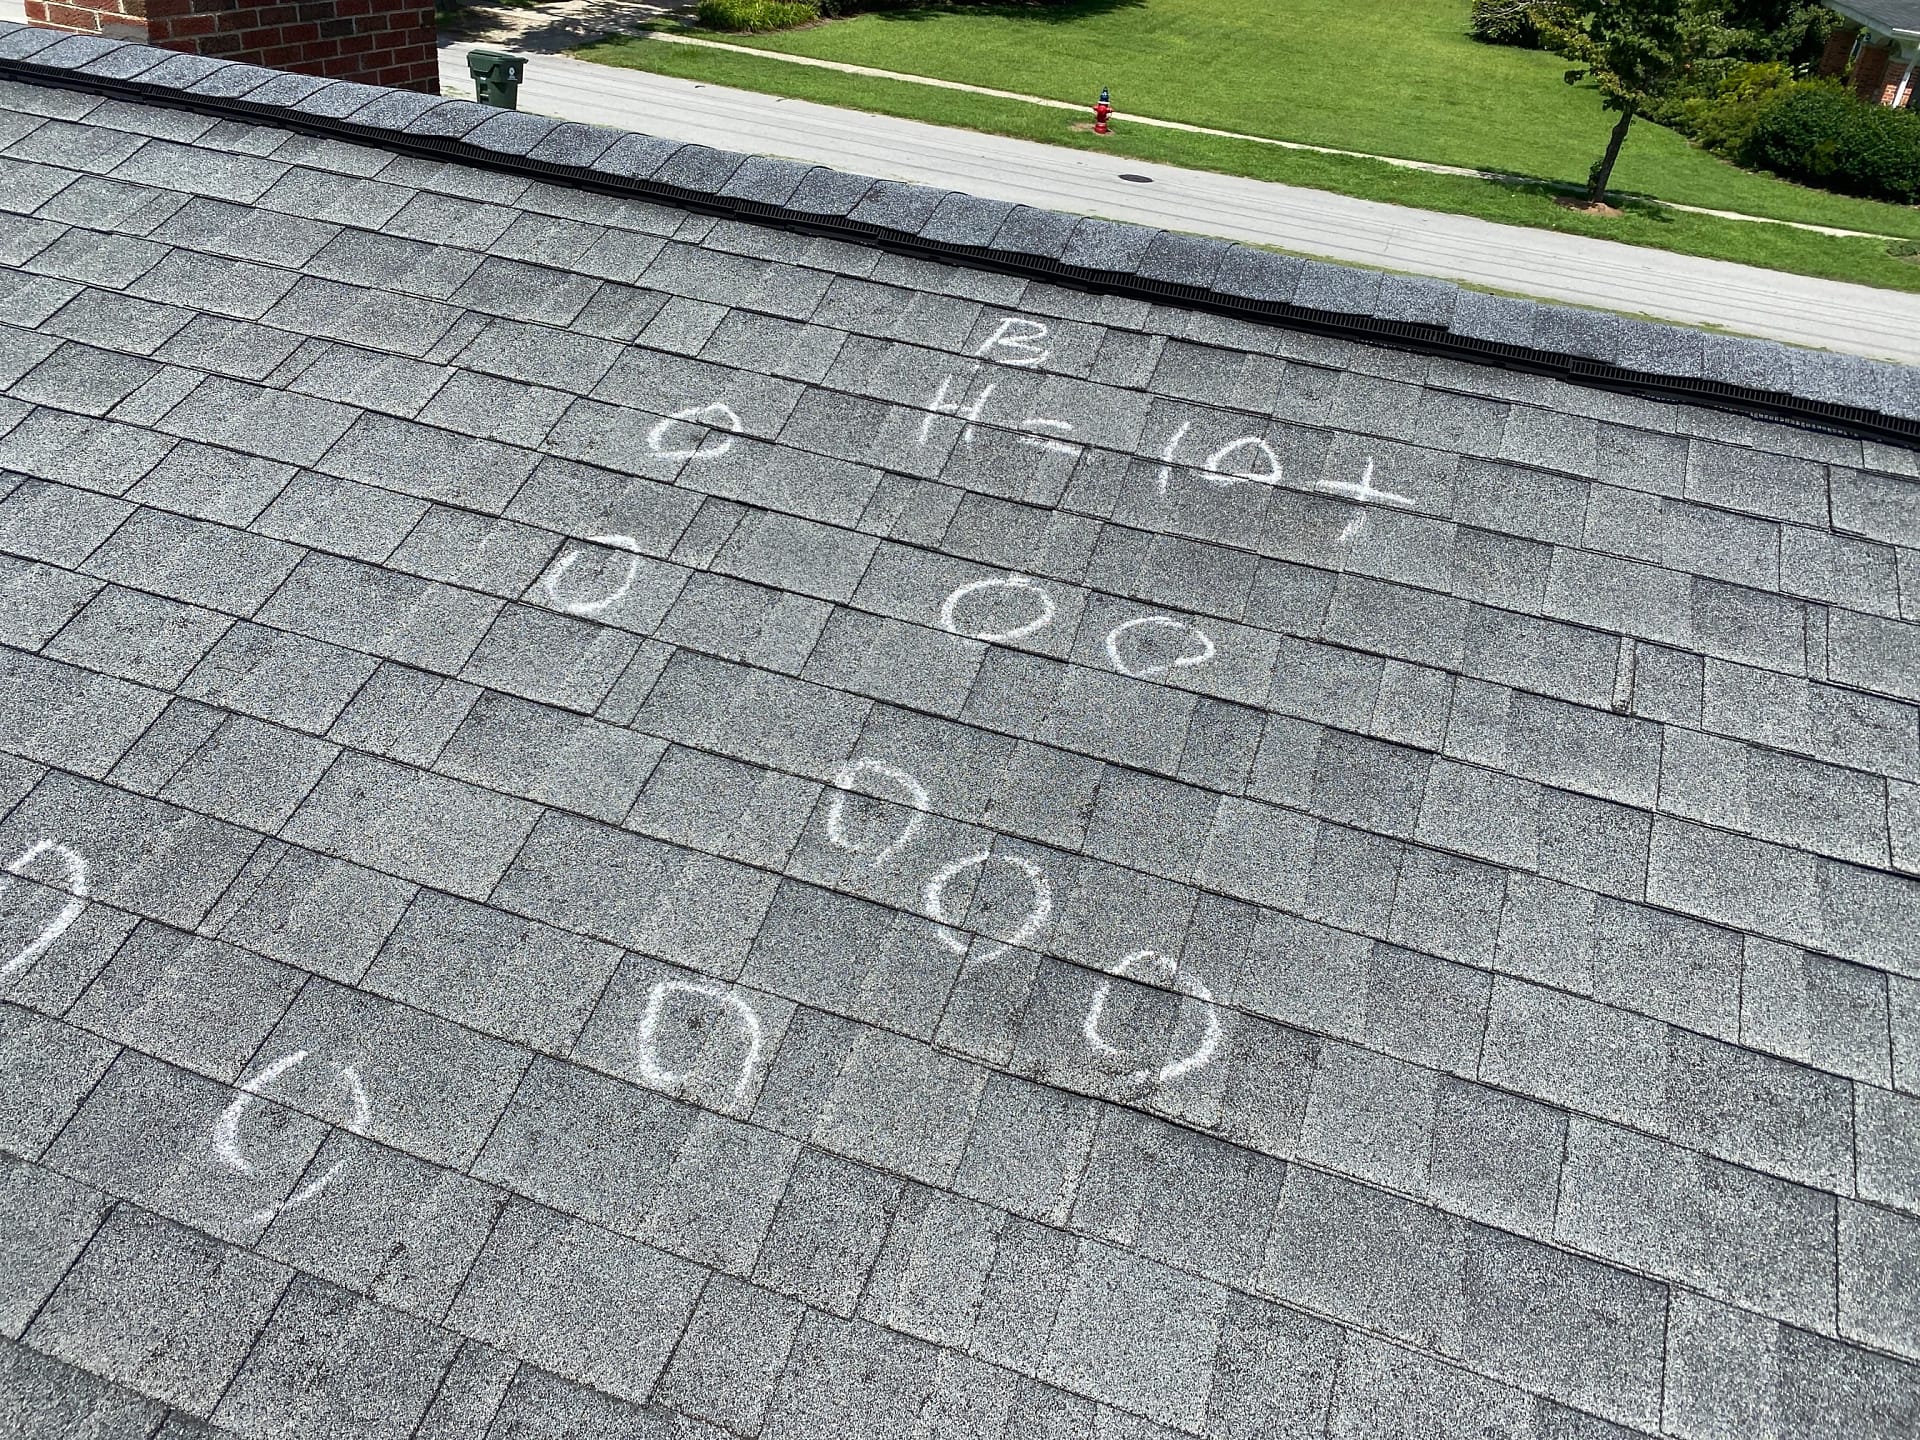 roofing shingles with hail damage marks